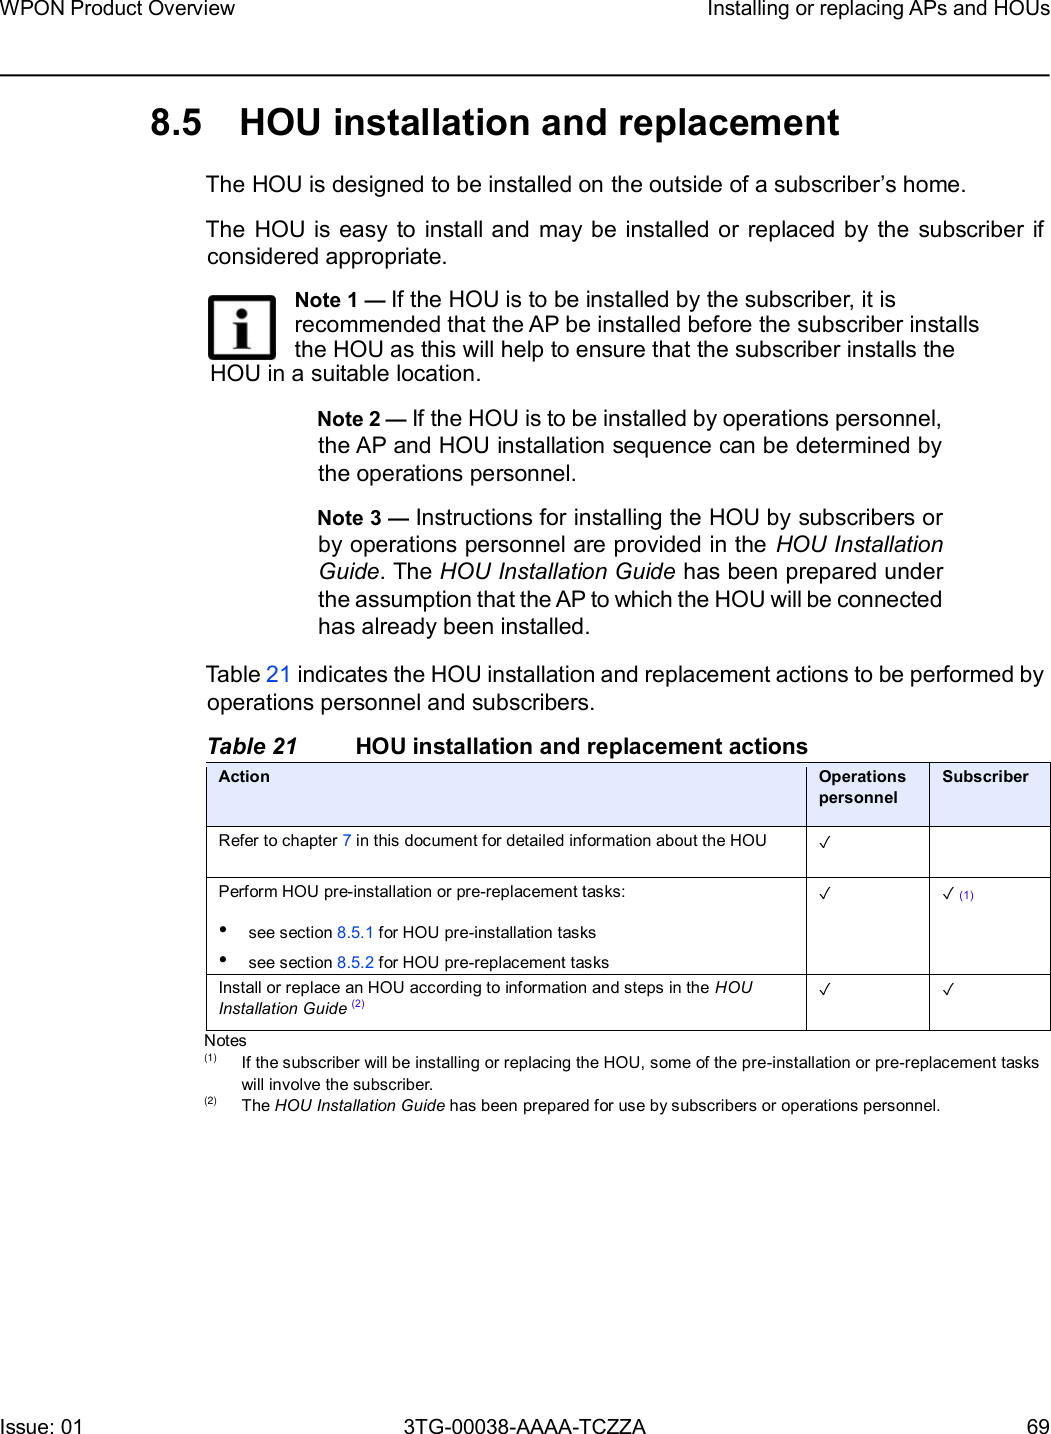 Page 69 of Nokia Bell 7577WPONAPAC WPON User Manual WPON Product Overview